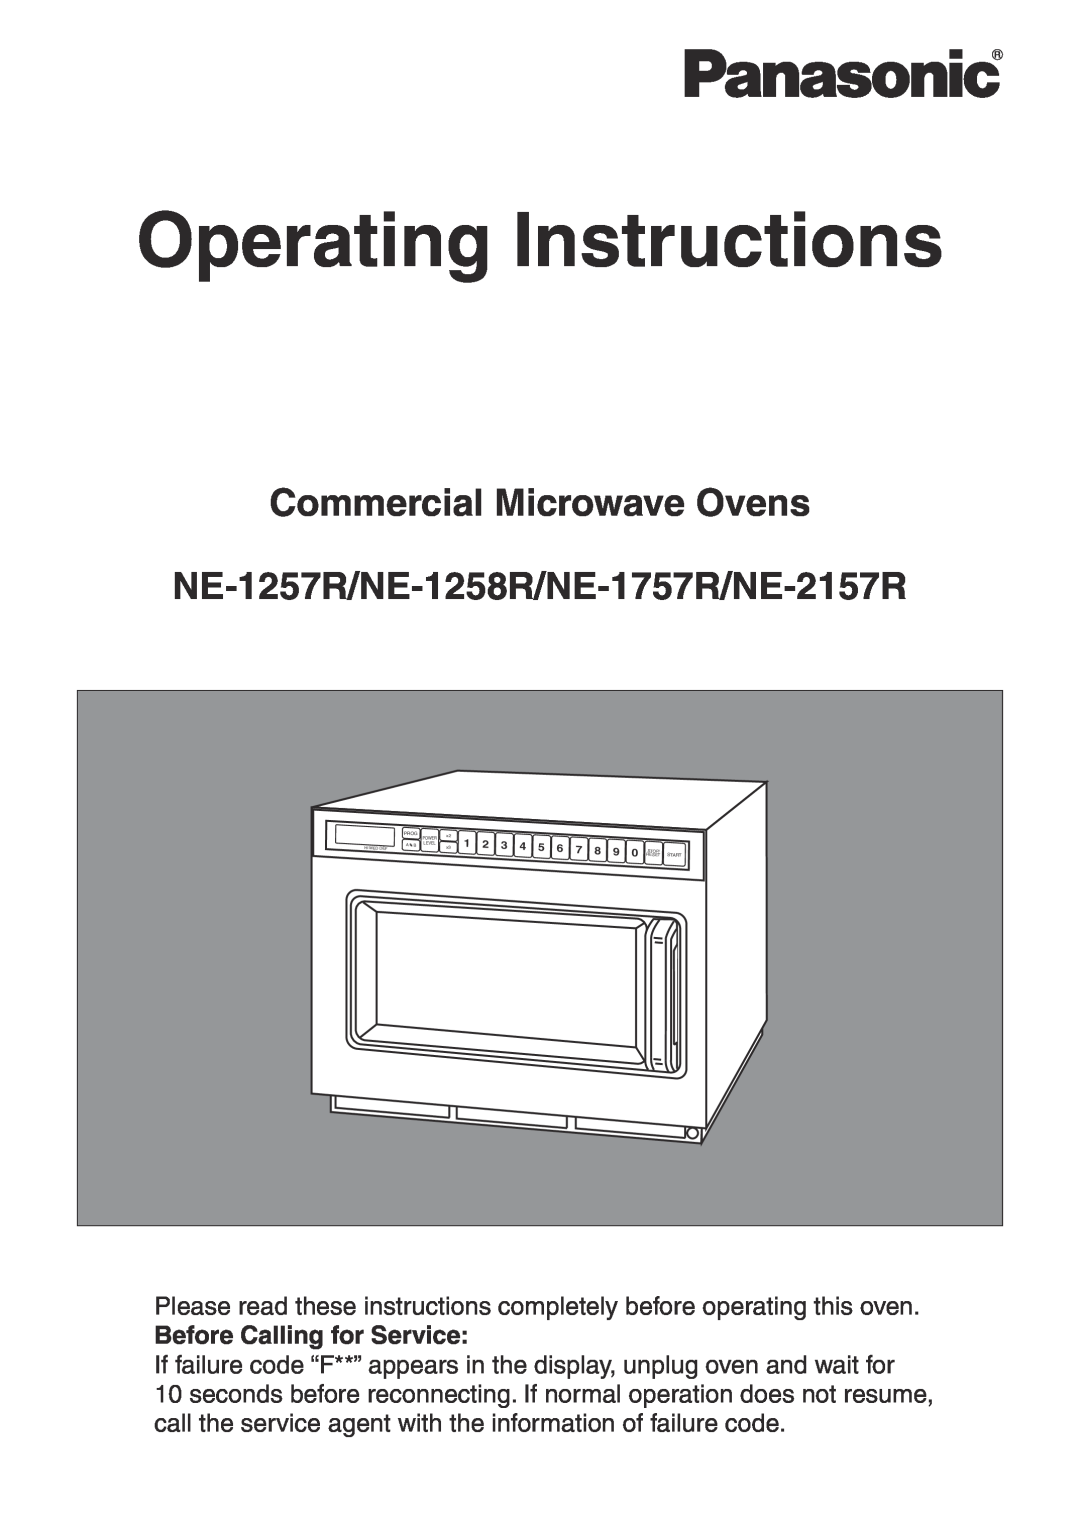 Panasonic NE-1757R, NE-2157R manual Before Calling for Service, Operating Instructions, Commercial Microwave Ovens 